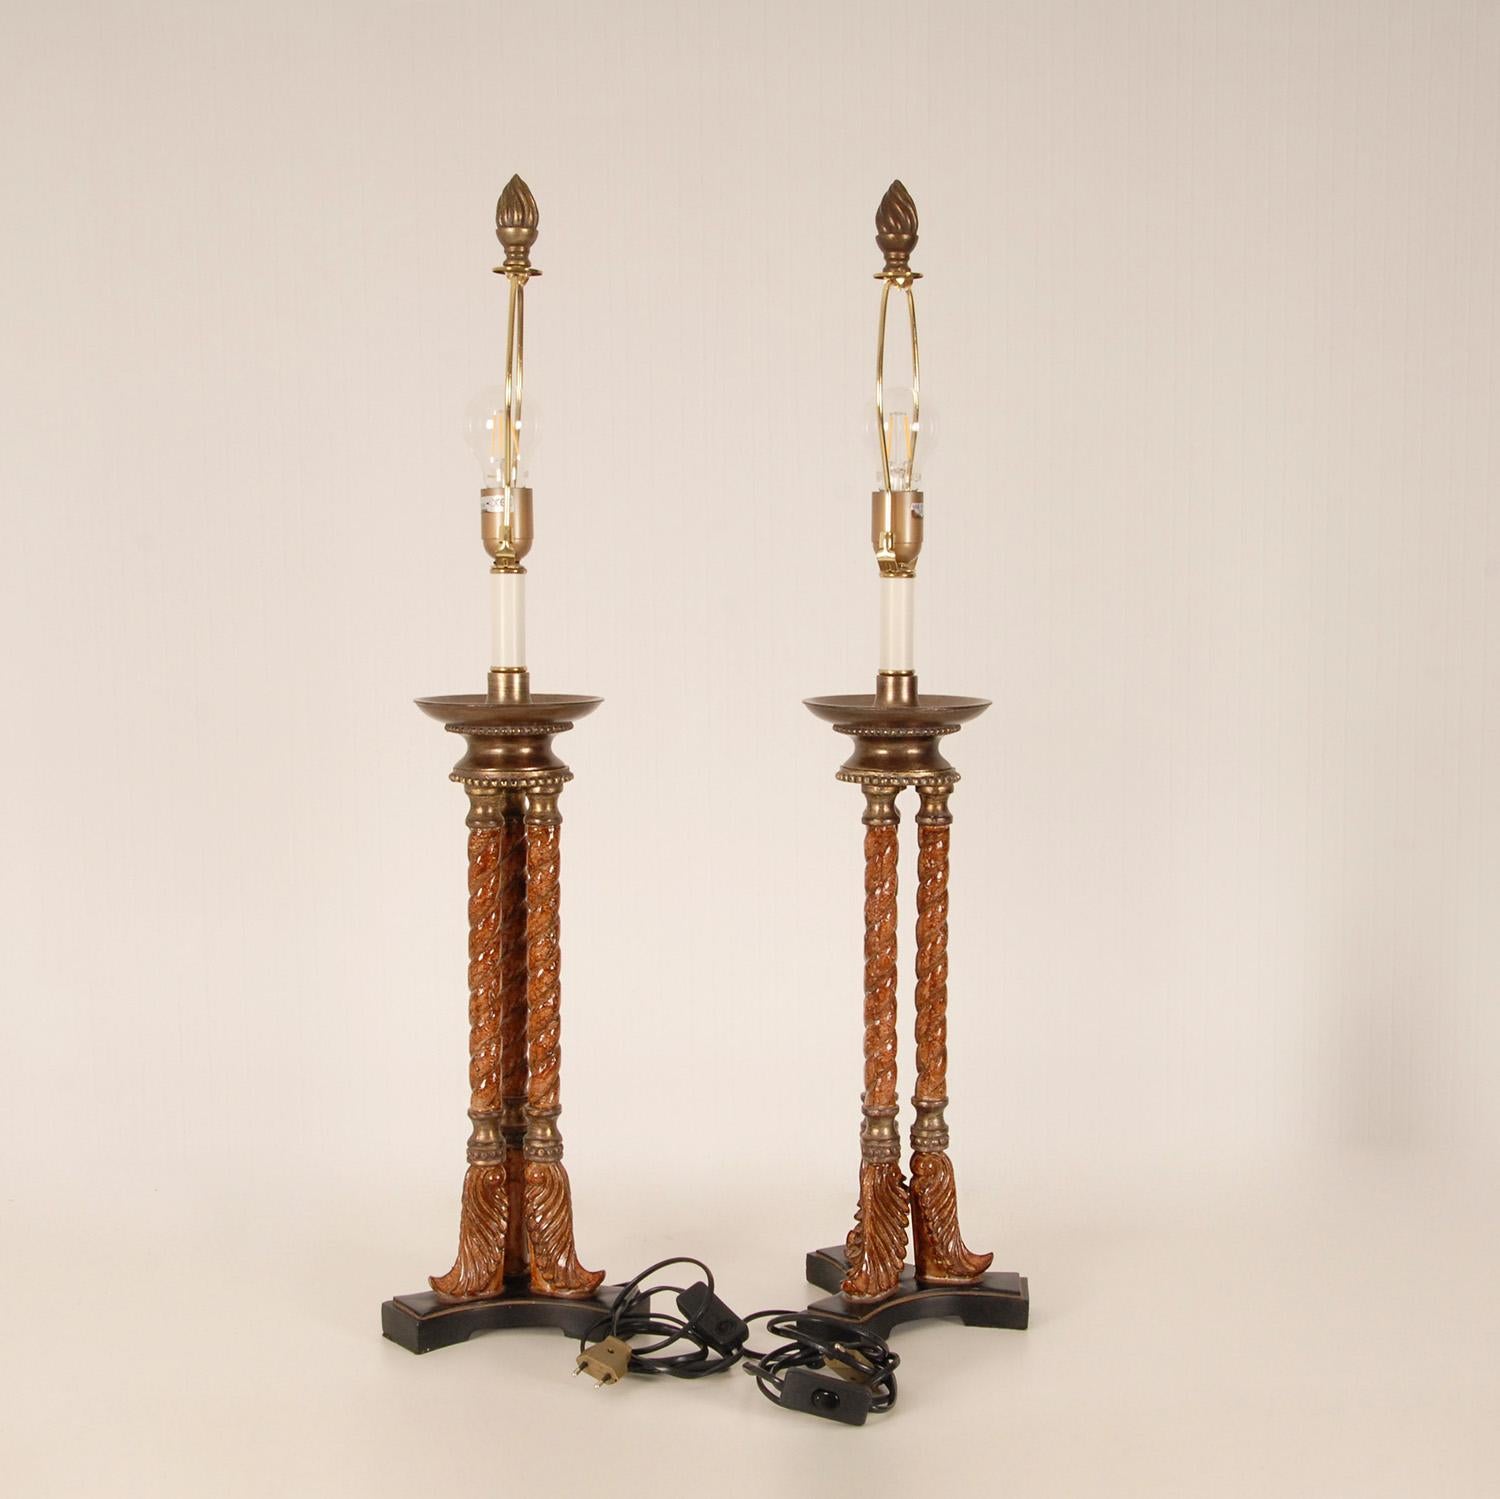 Neoclassical Revival Vintage Gold Gilded Bronze and Turned Burl Wood Athenian Tripod Table Lamps For Sale